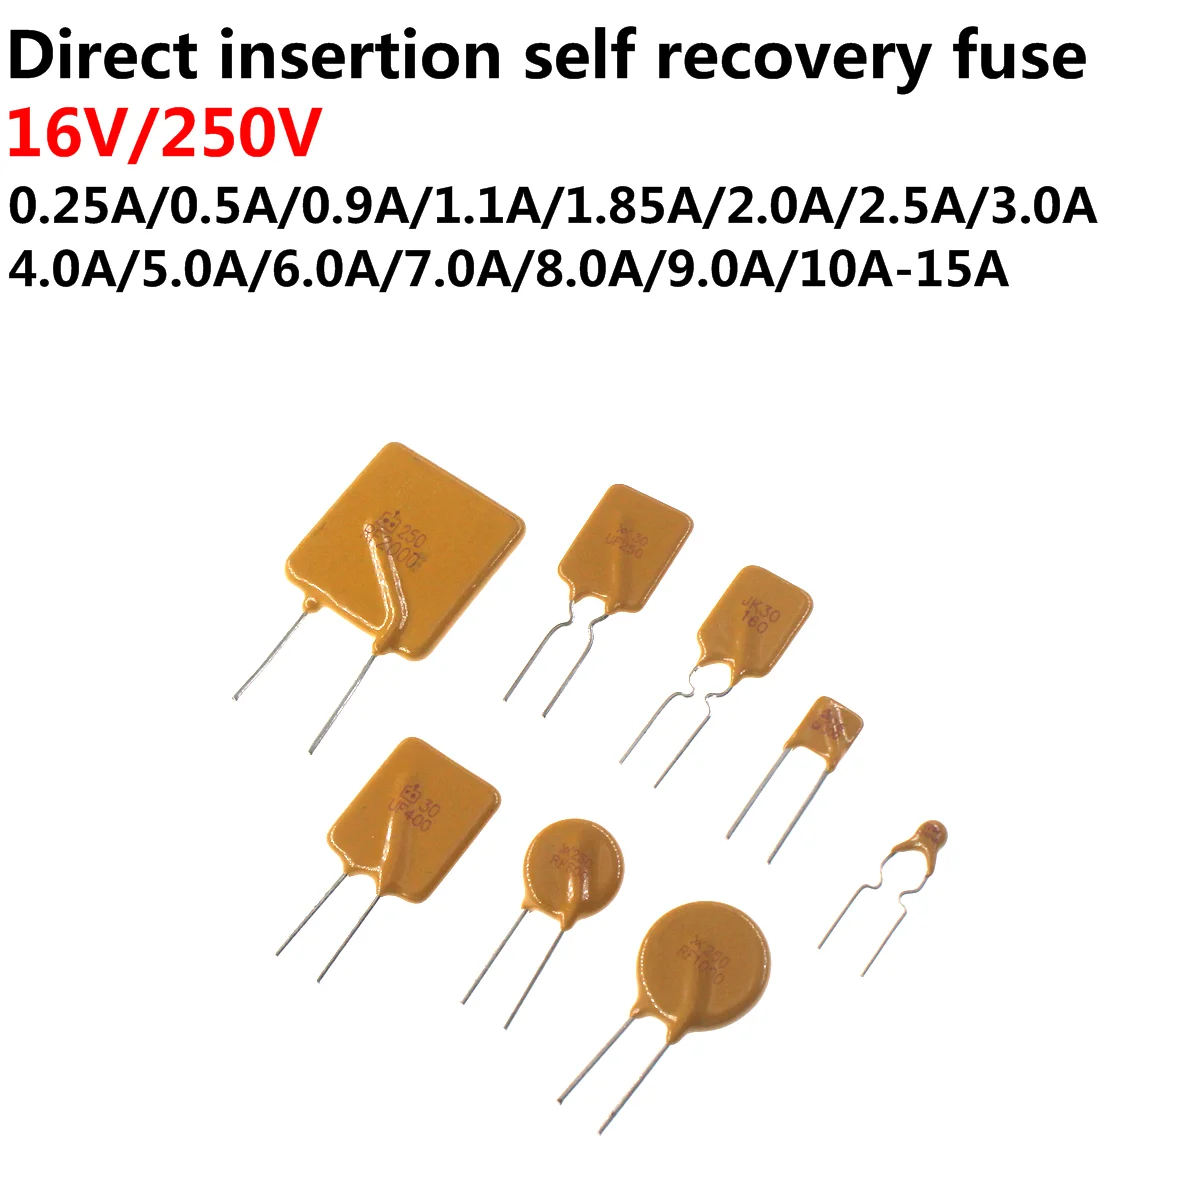 100/50/20PCS Self Recovery Fuse JK16-1000 16V 25v 0.05a 50ma 0.1a 100ma 0.5a 500ma 1.1a 1a 1000ma 2a 3a 4a 5a  10000MA PPTC dc 1ma 20ma 30ma 50ma 100ma 200ma 300ma 500ma analog current panel meter ampere ammeter dh 670 dh670